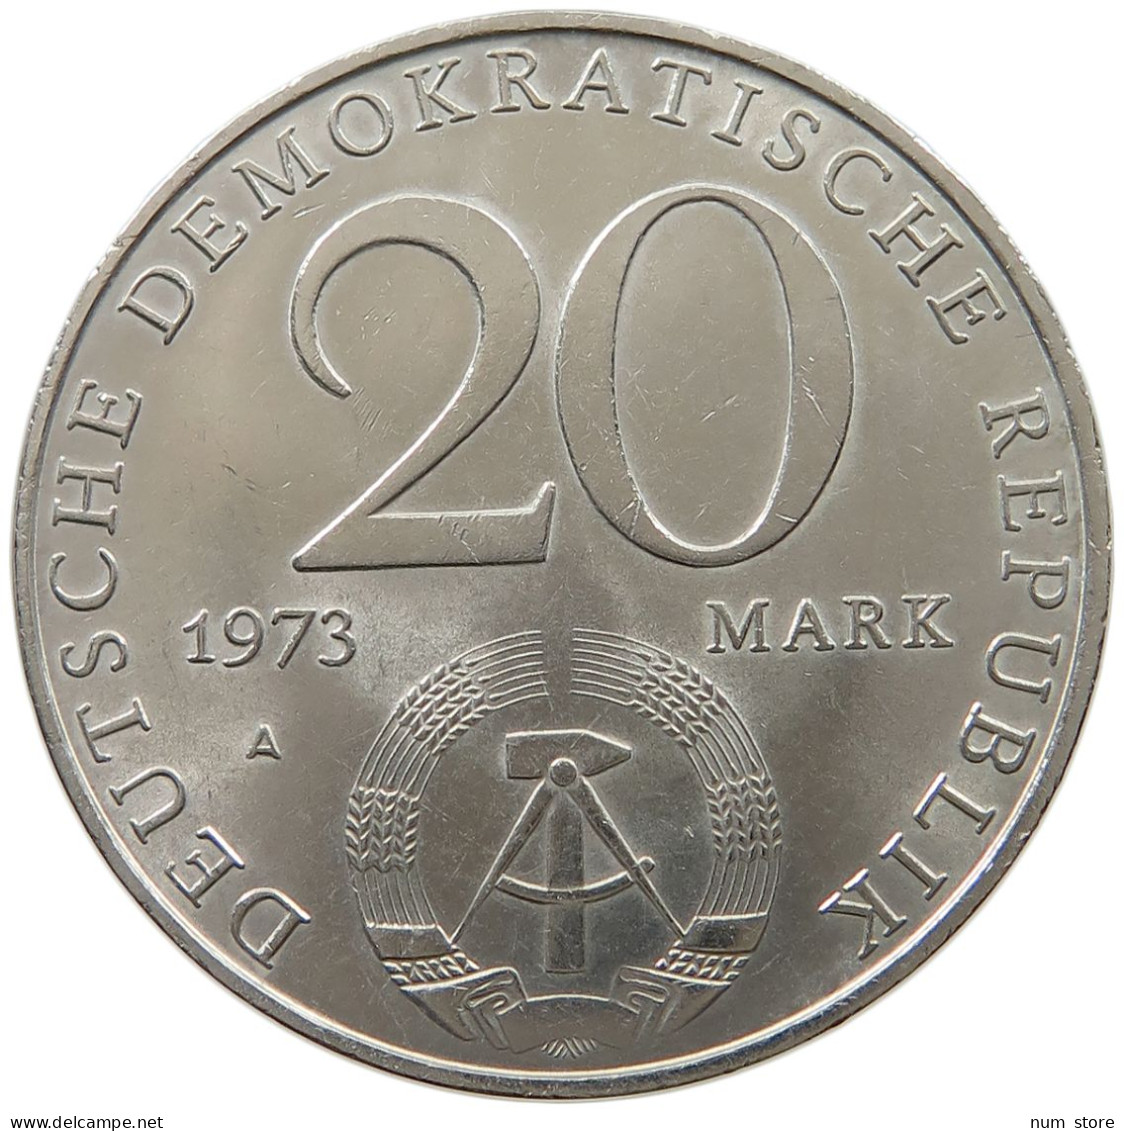 GERMANY DDR 20 MARK 1973 GROTEWOHL #a030 0317 - 20 Mark